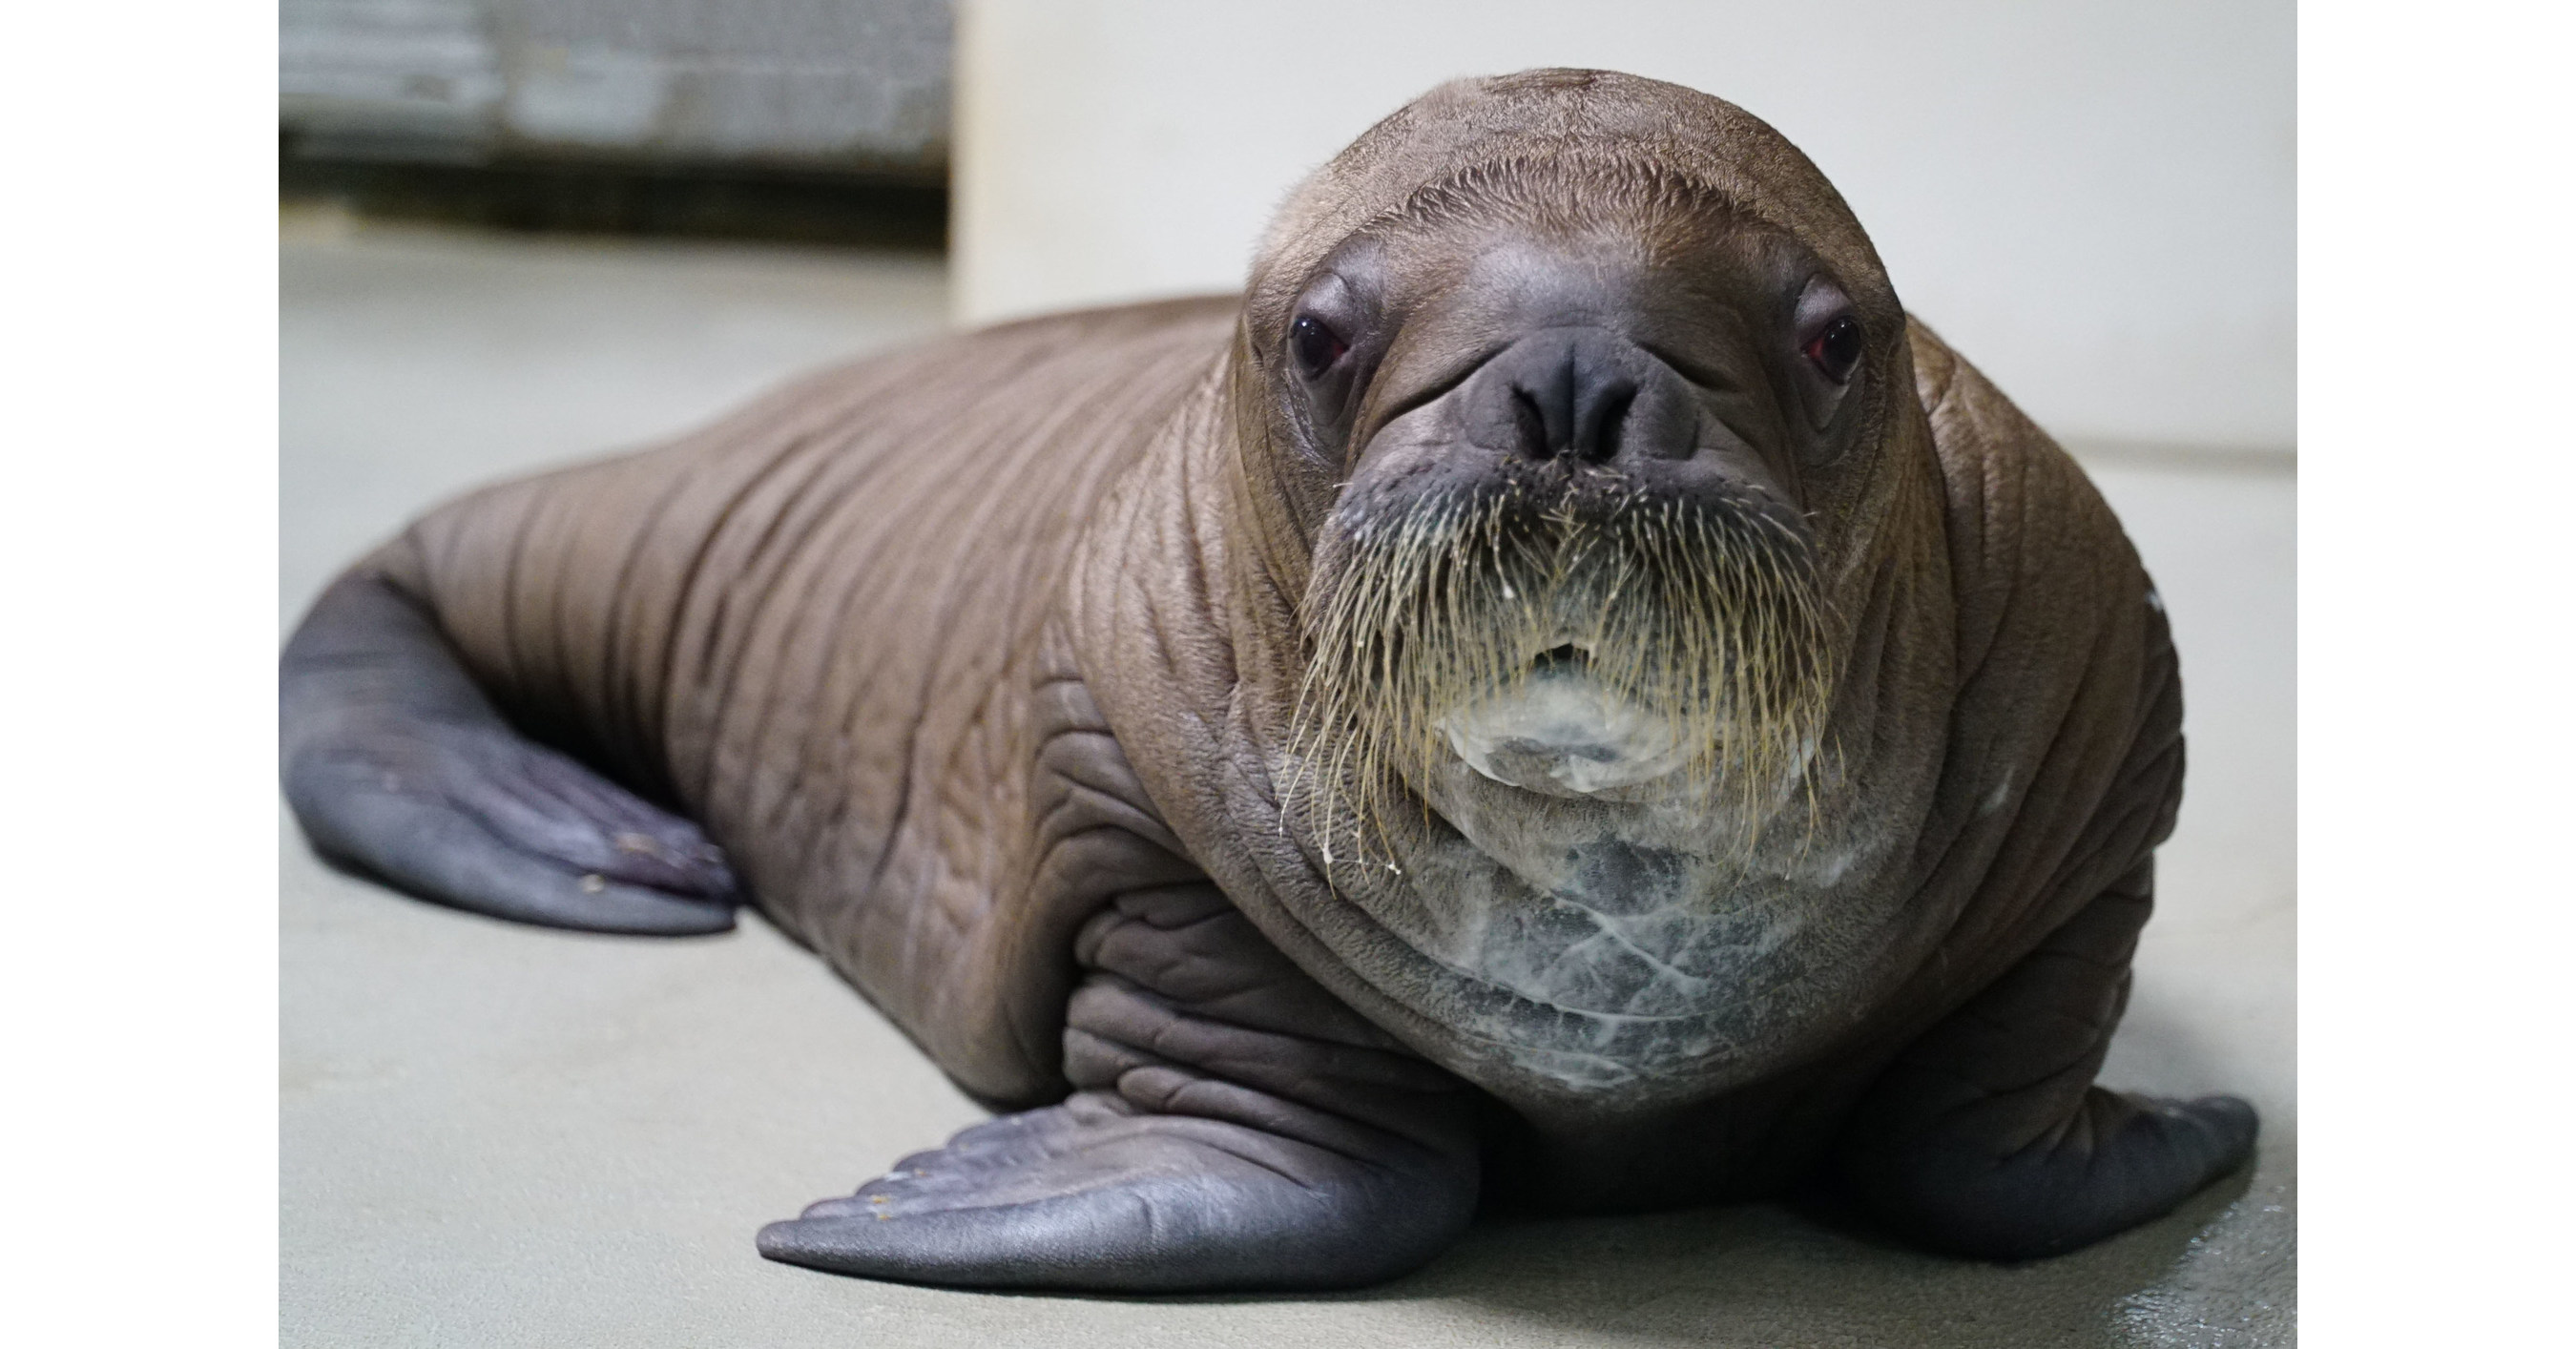 SeaWorld Orlando Proudly Welcomes Whiskered Baby Walrus